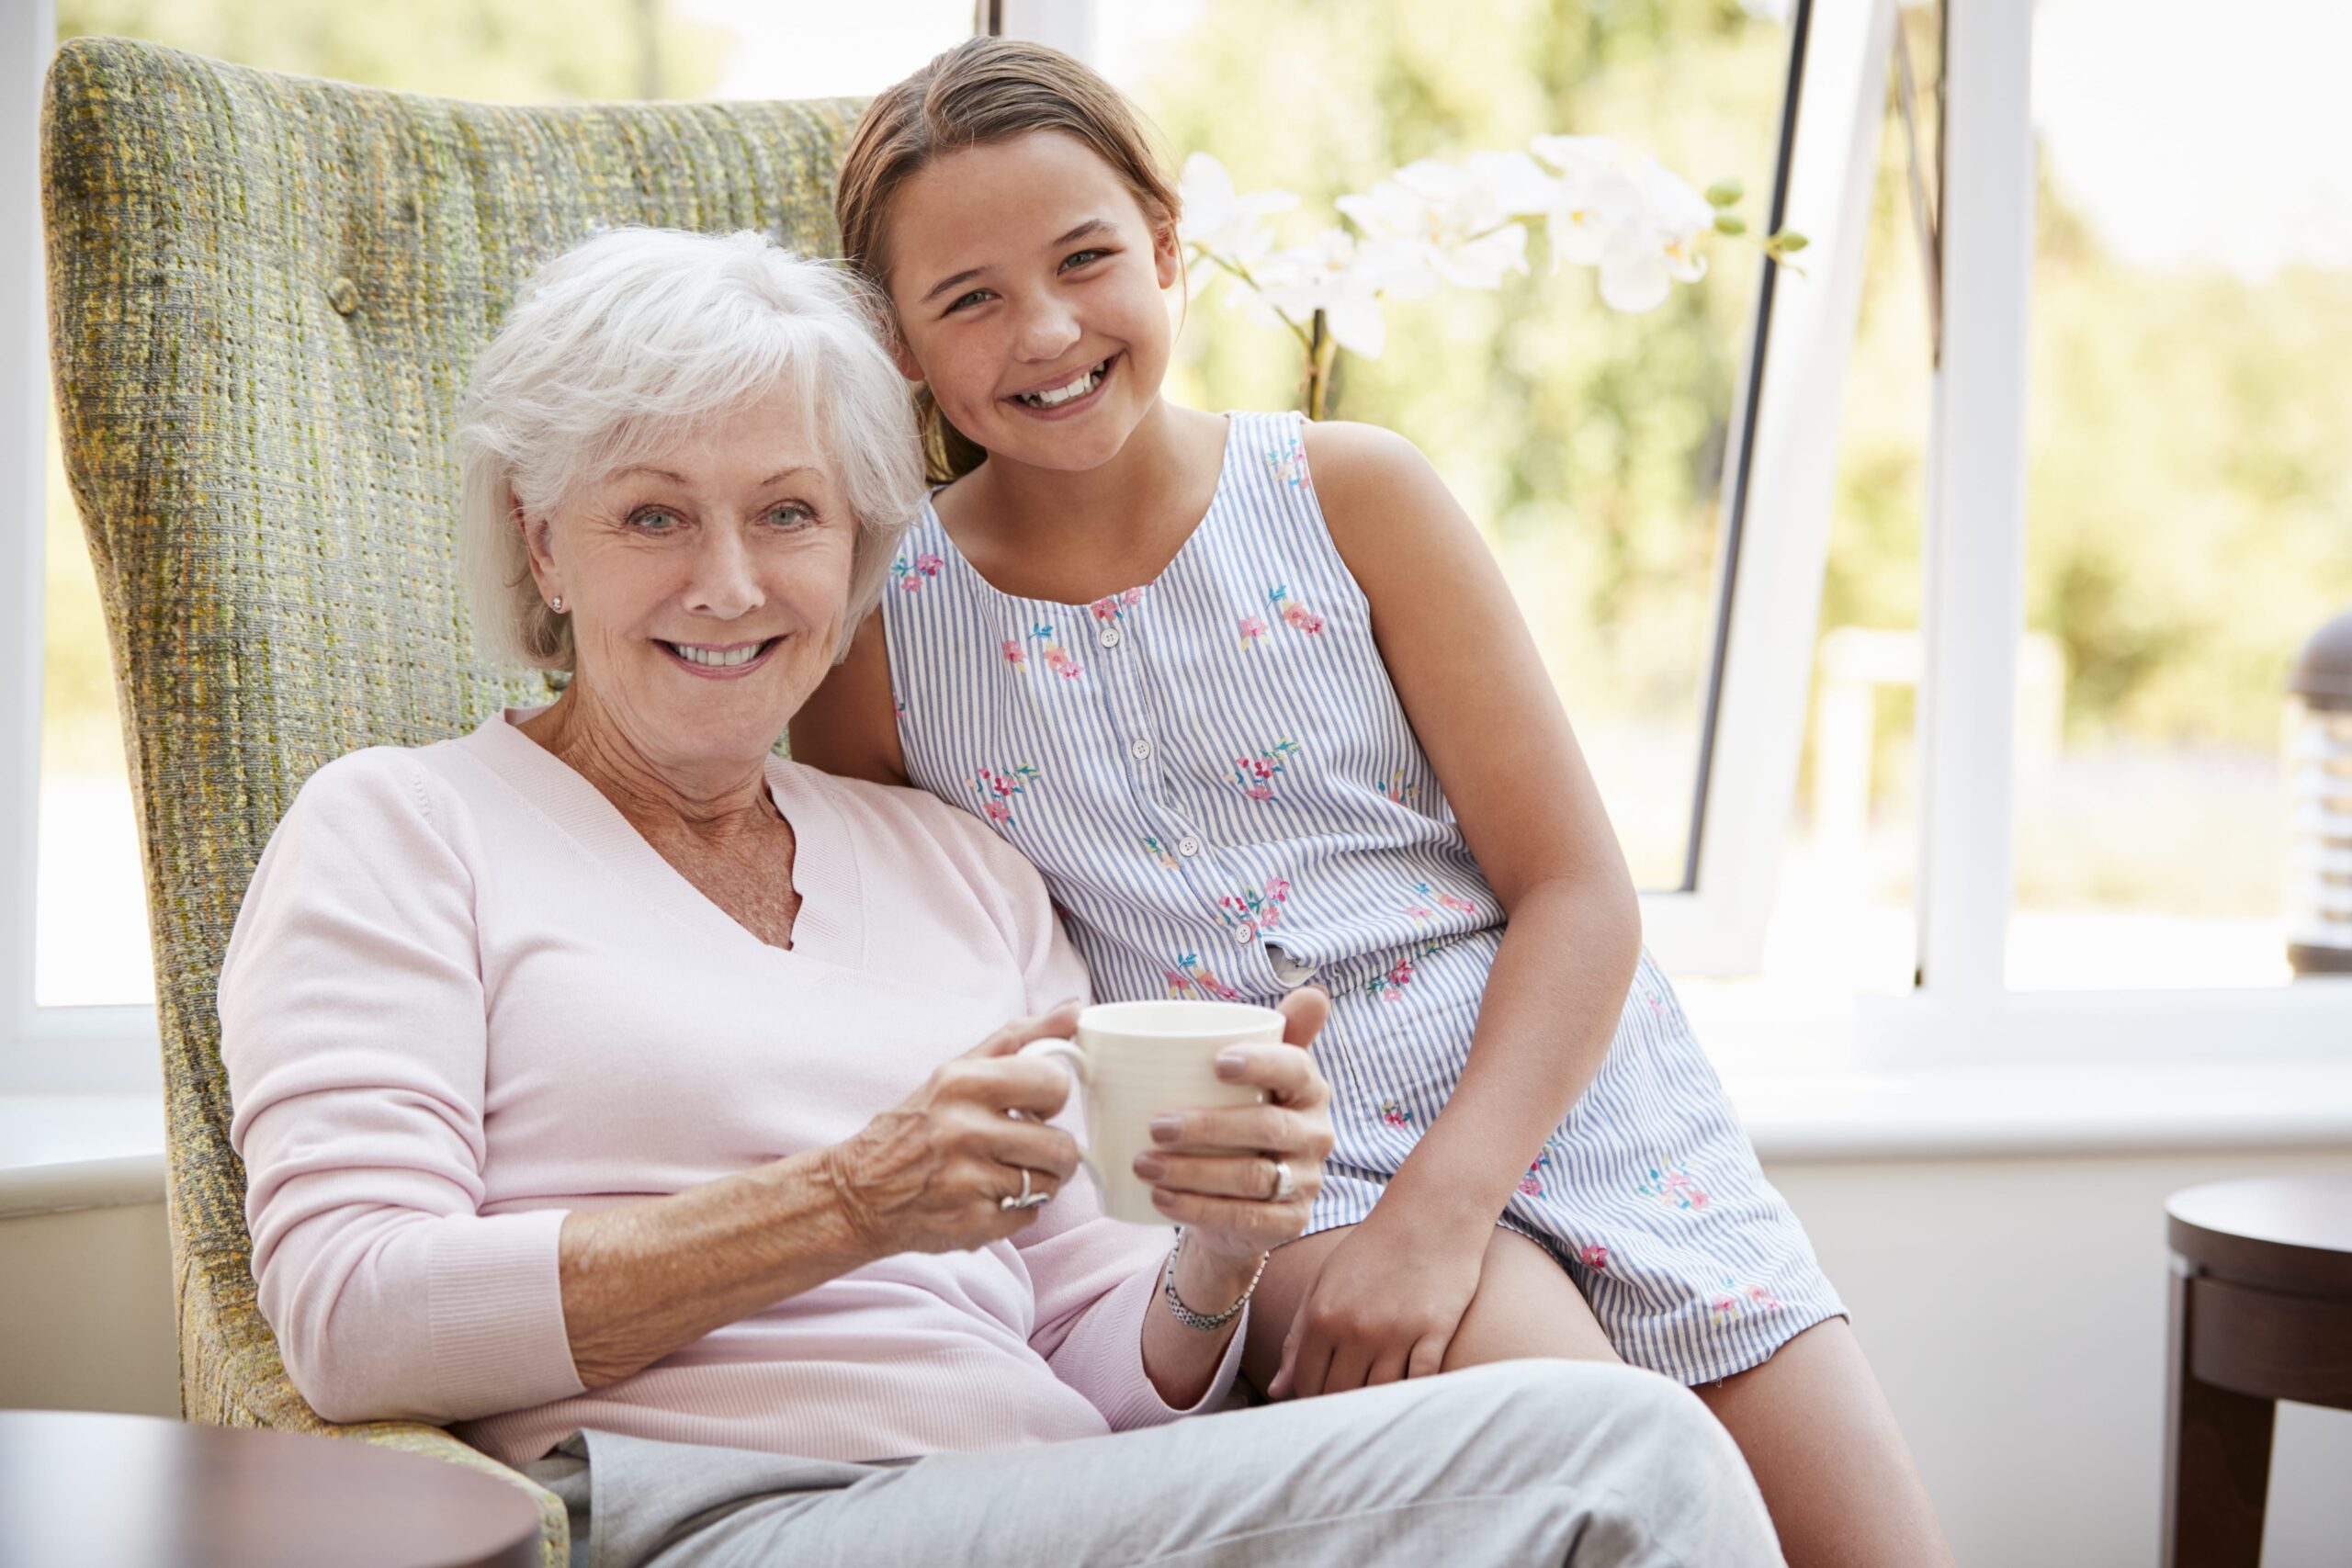 Smiling senior woman sitting with granddaughter